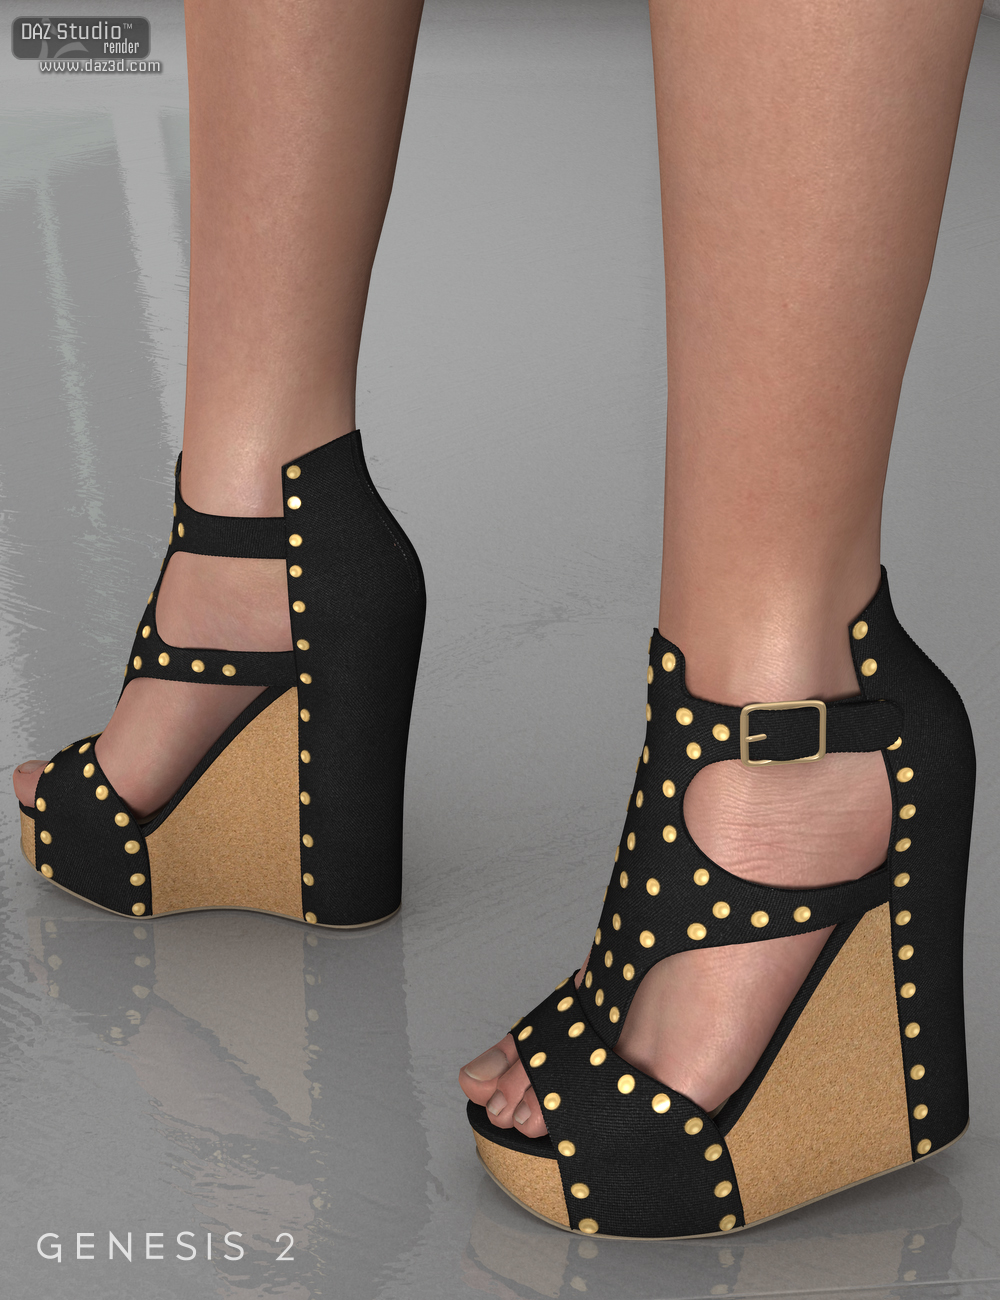 Summer Wedges for Genesis 2 Female(s) by: Nikisatez, 3D Models by Daz 3D